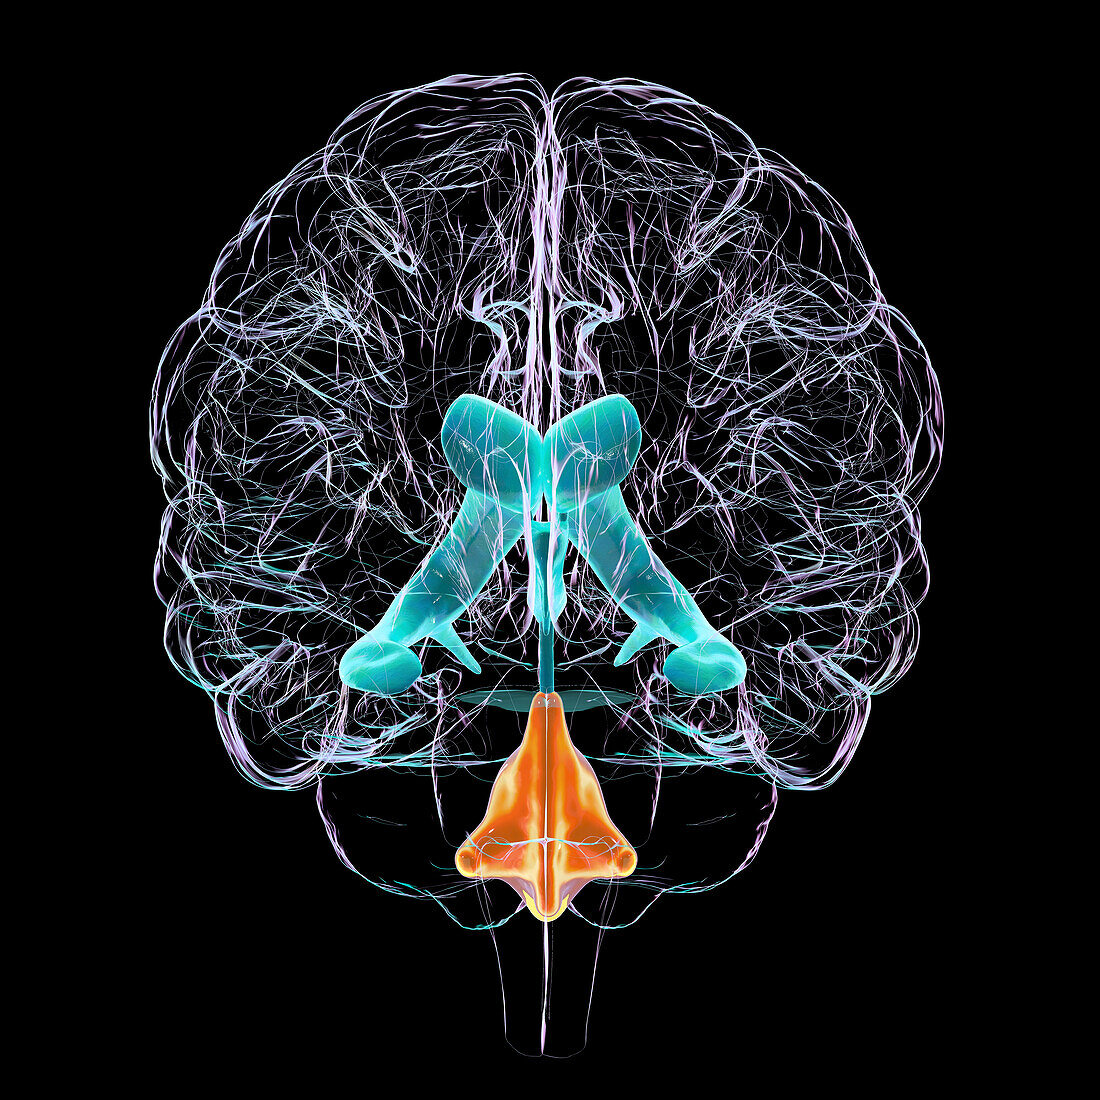 Enlarged fourth ventricle of the brain, illustration